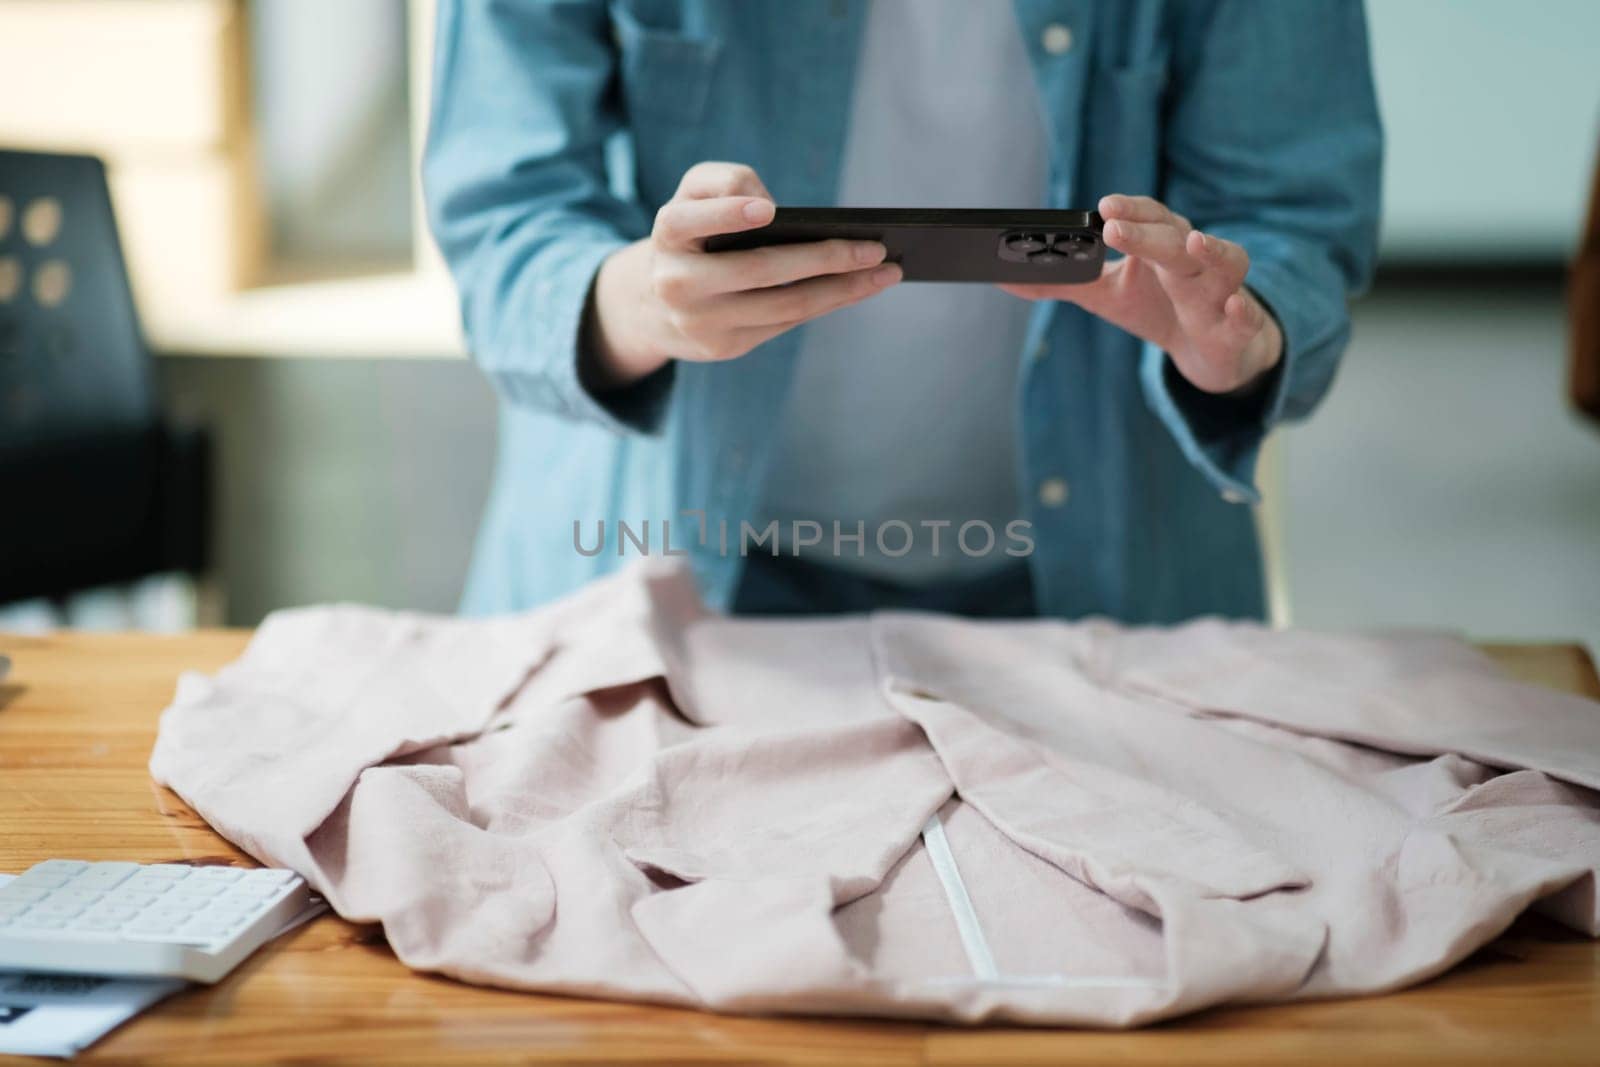 Online Business Owner Photographing Apparel for SaleOnline Business Owner Photographing Apparel for Sale. by ijeab